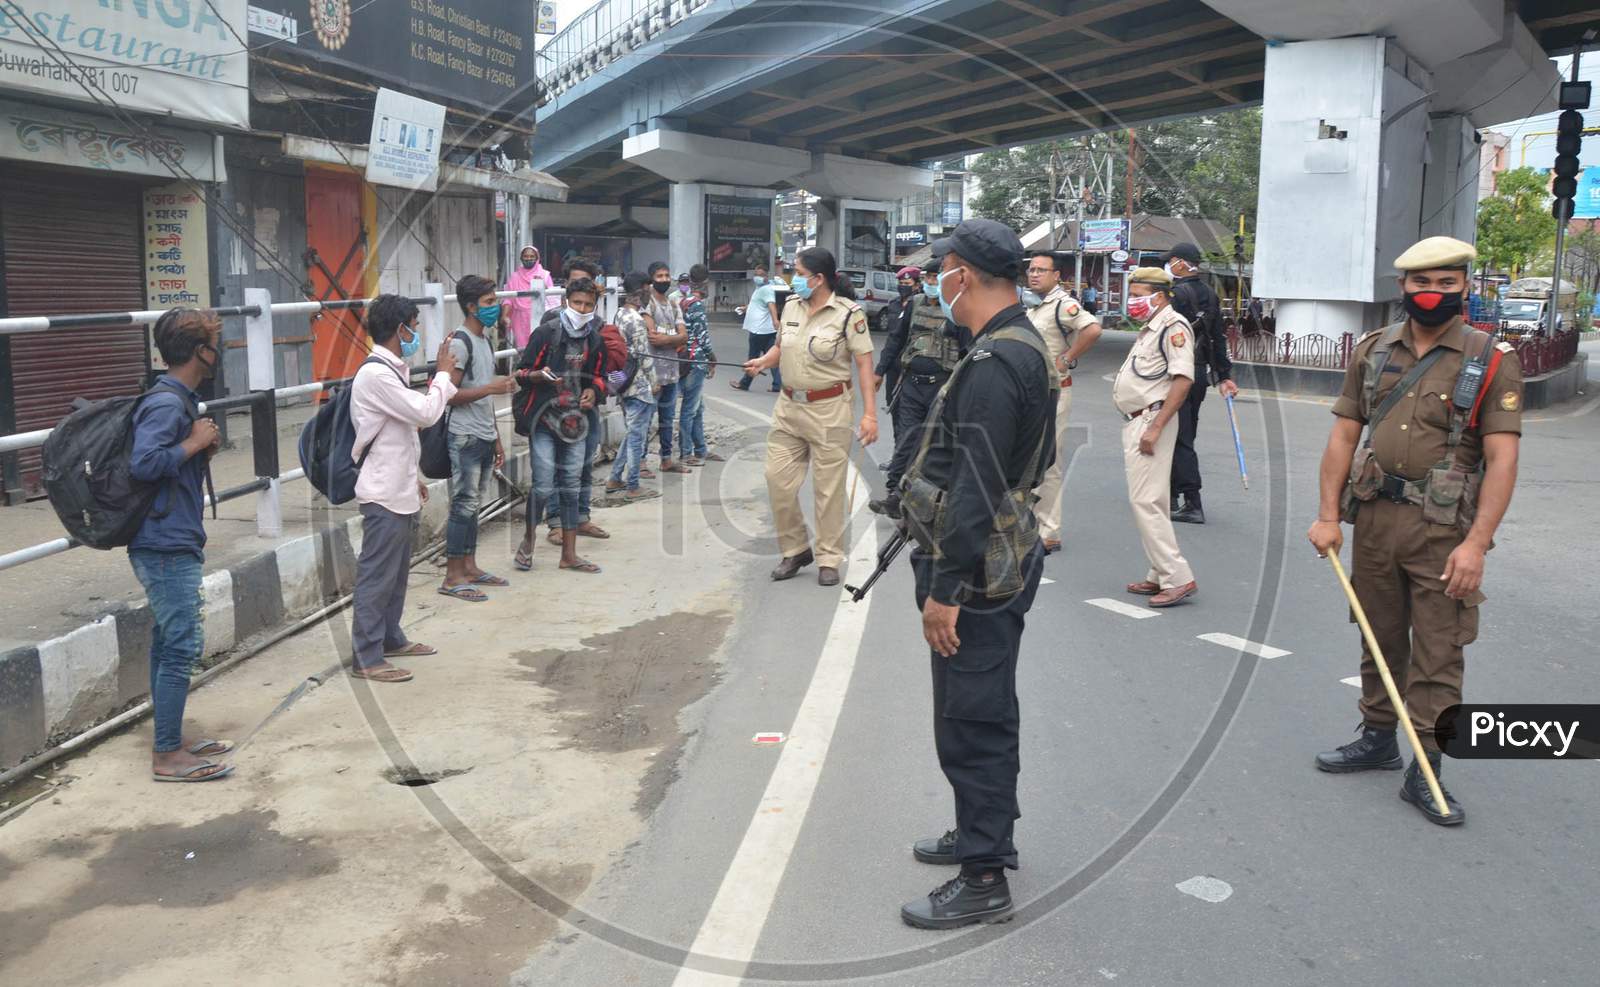 Security Personnel Punish The People For Flouting The Lockdown Rules During Nationwide Lockdown Amidst Coronavirus or COVID-19 Pandemic In Guwahati On April 28, 2020